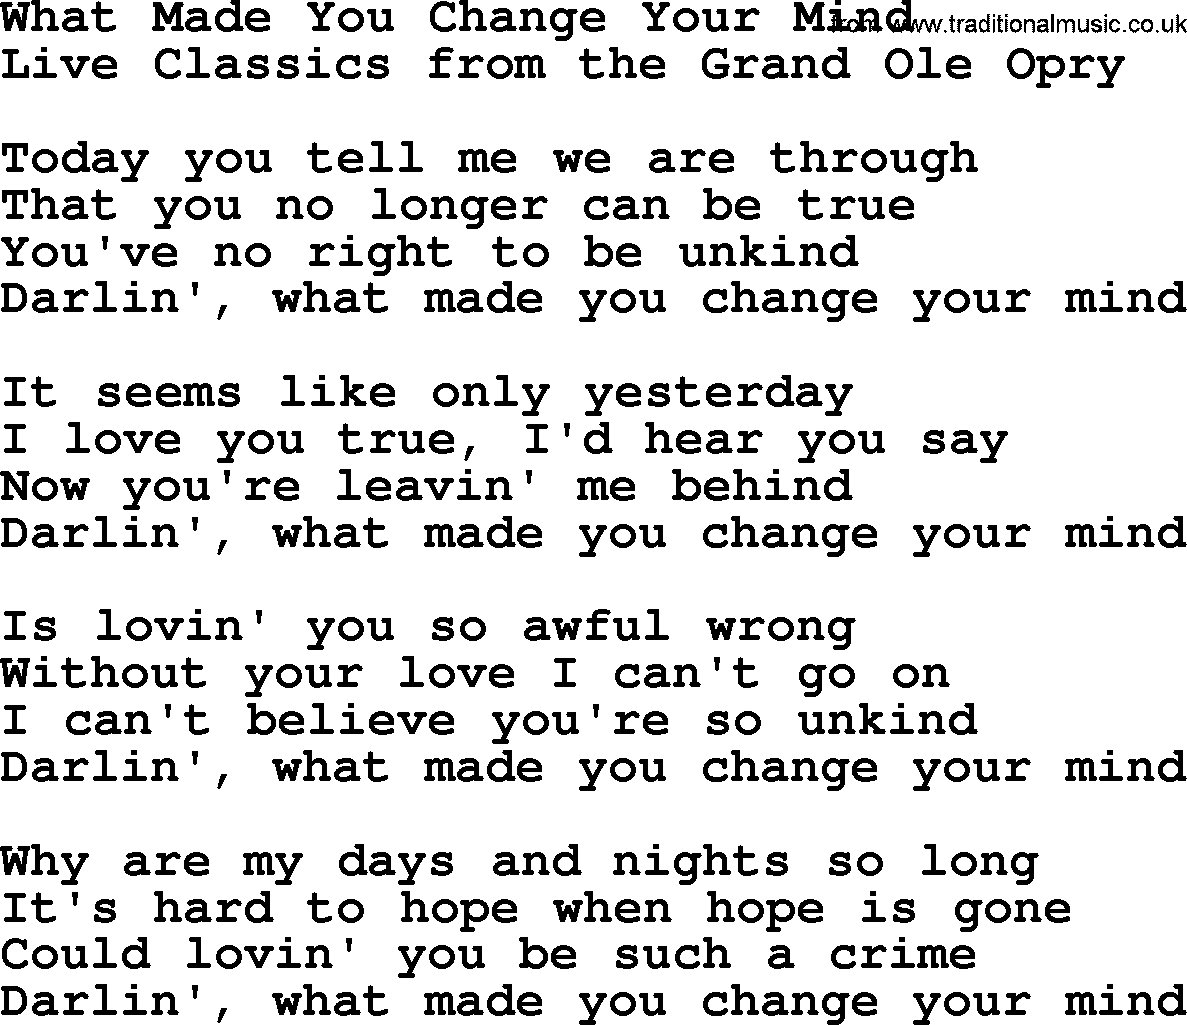 Marty Robbins song: What Made You Change Your Mind, lyrics